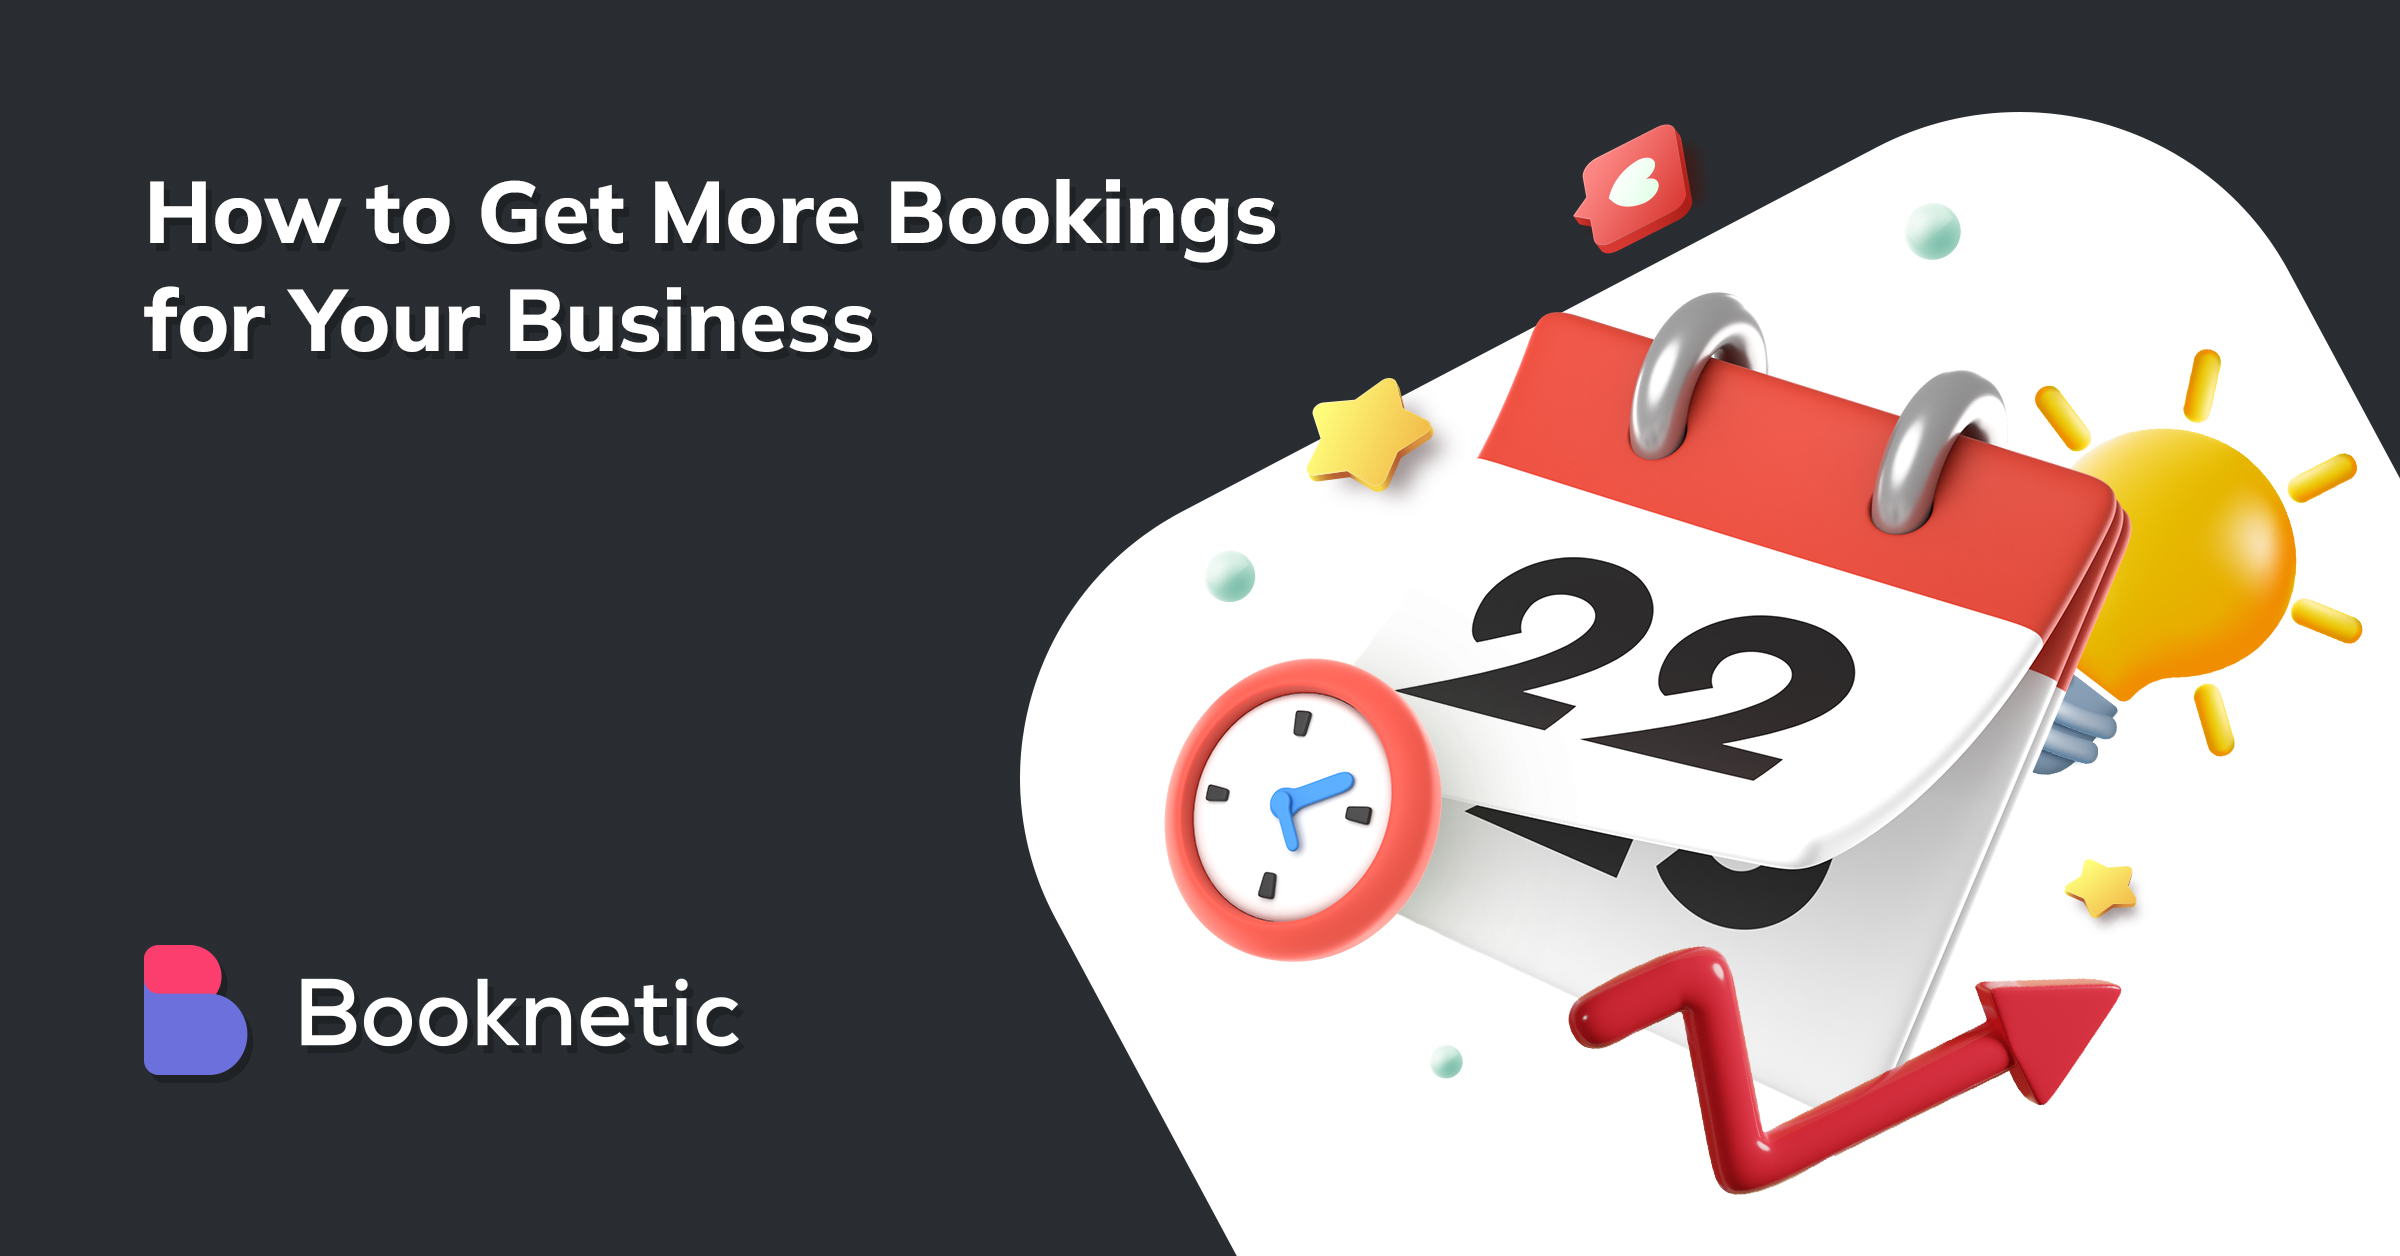 How To Get More Bookings For Business?